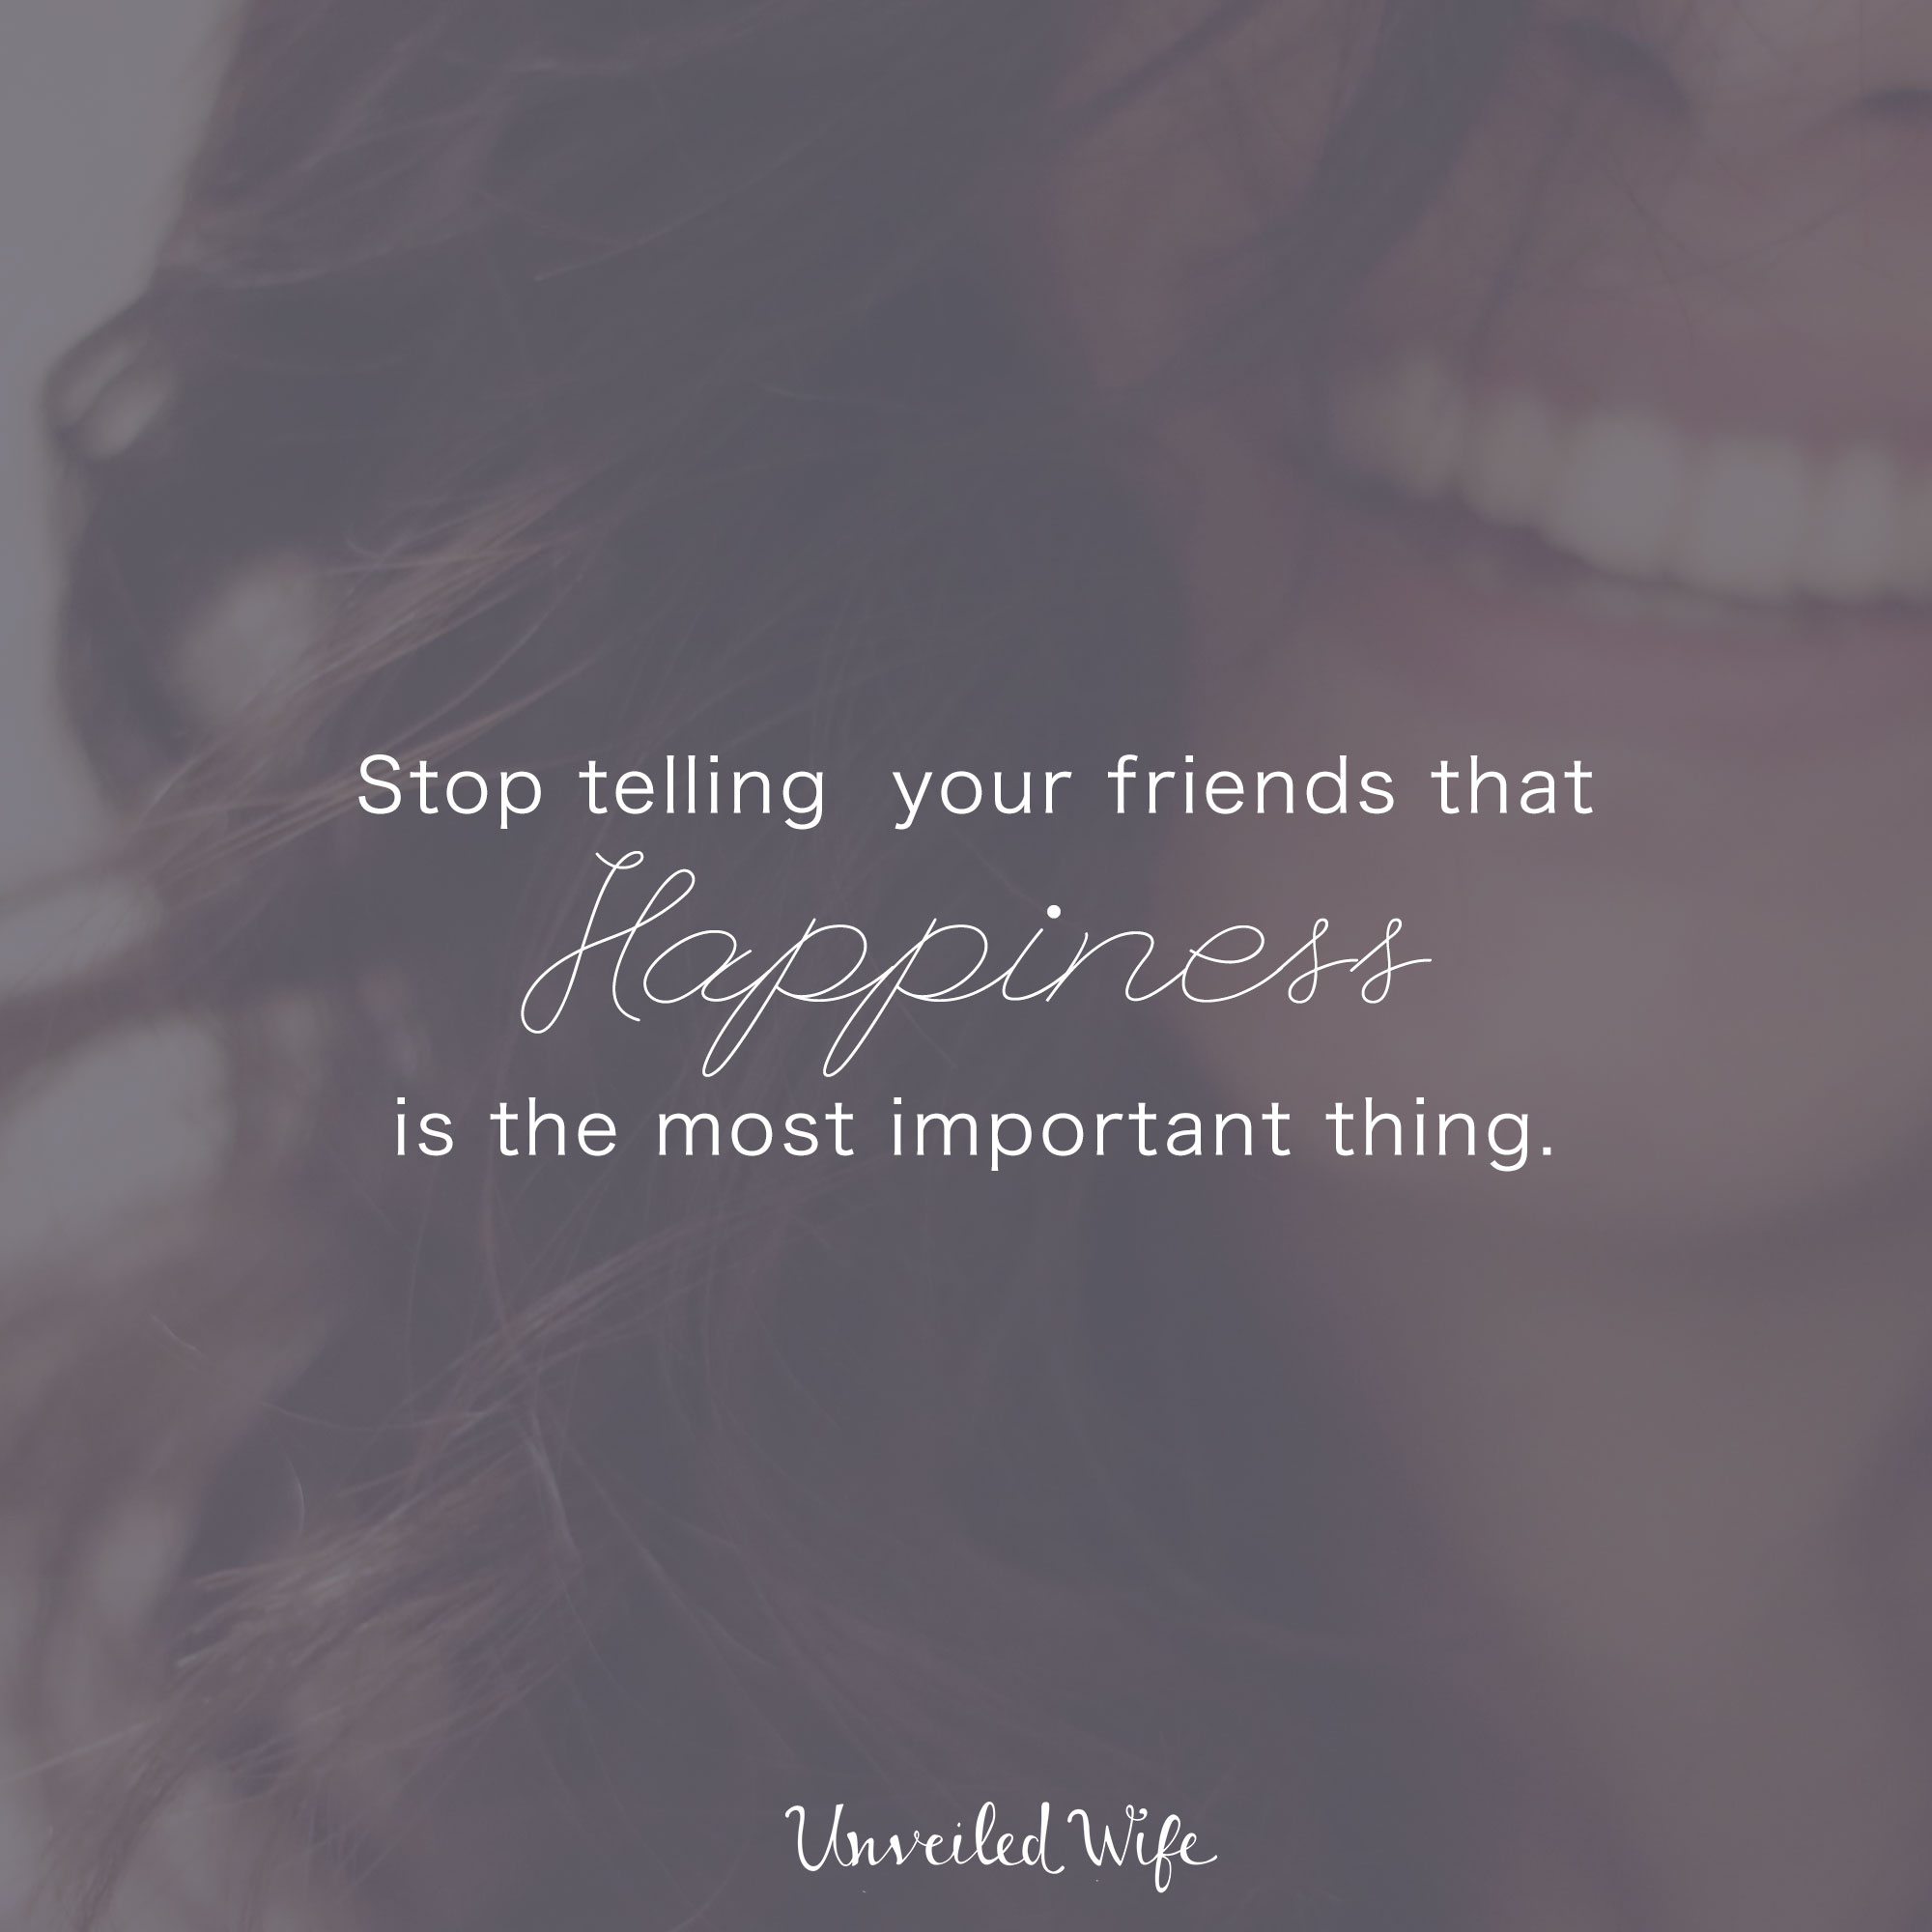 happiness-most-important